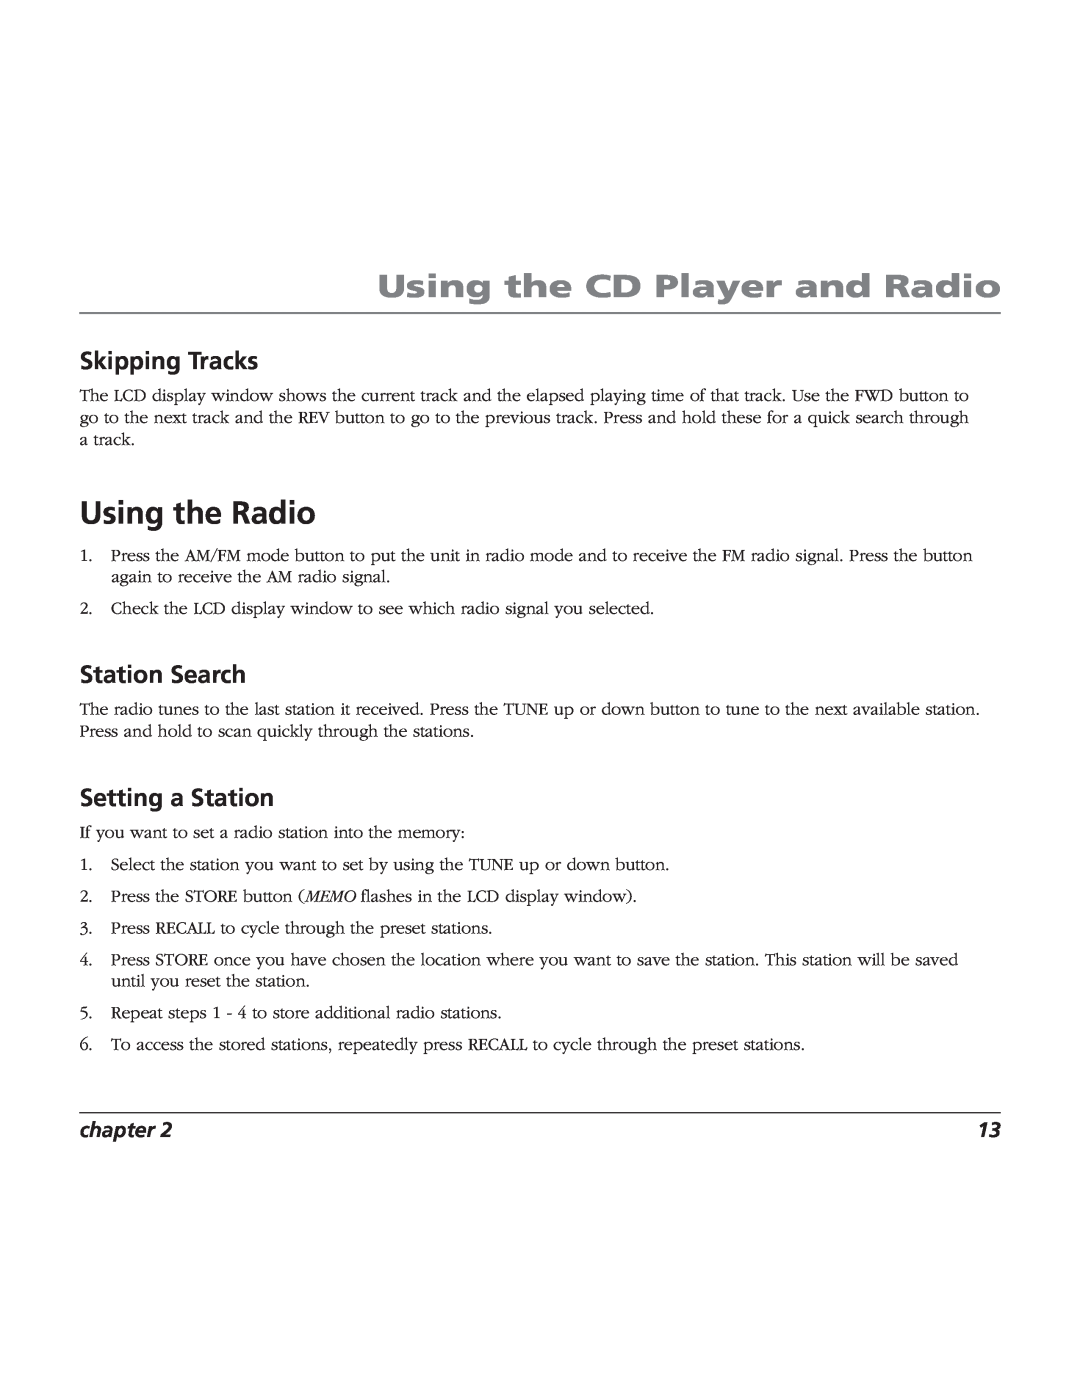 RCA BLC524 Using the Radio, Skipping Tracks, Station Search, Setting a Station, Using the CD Player and Radio, chapter 